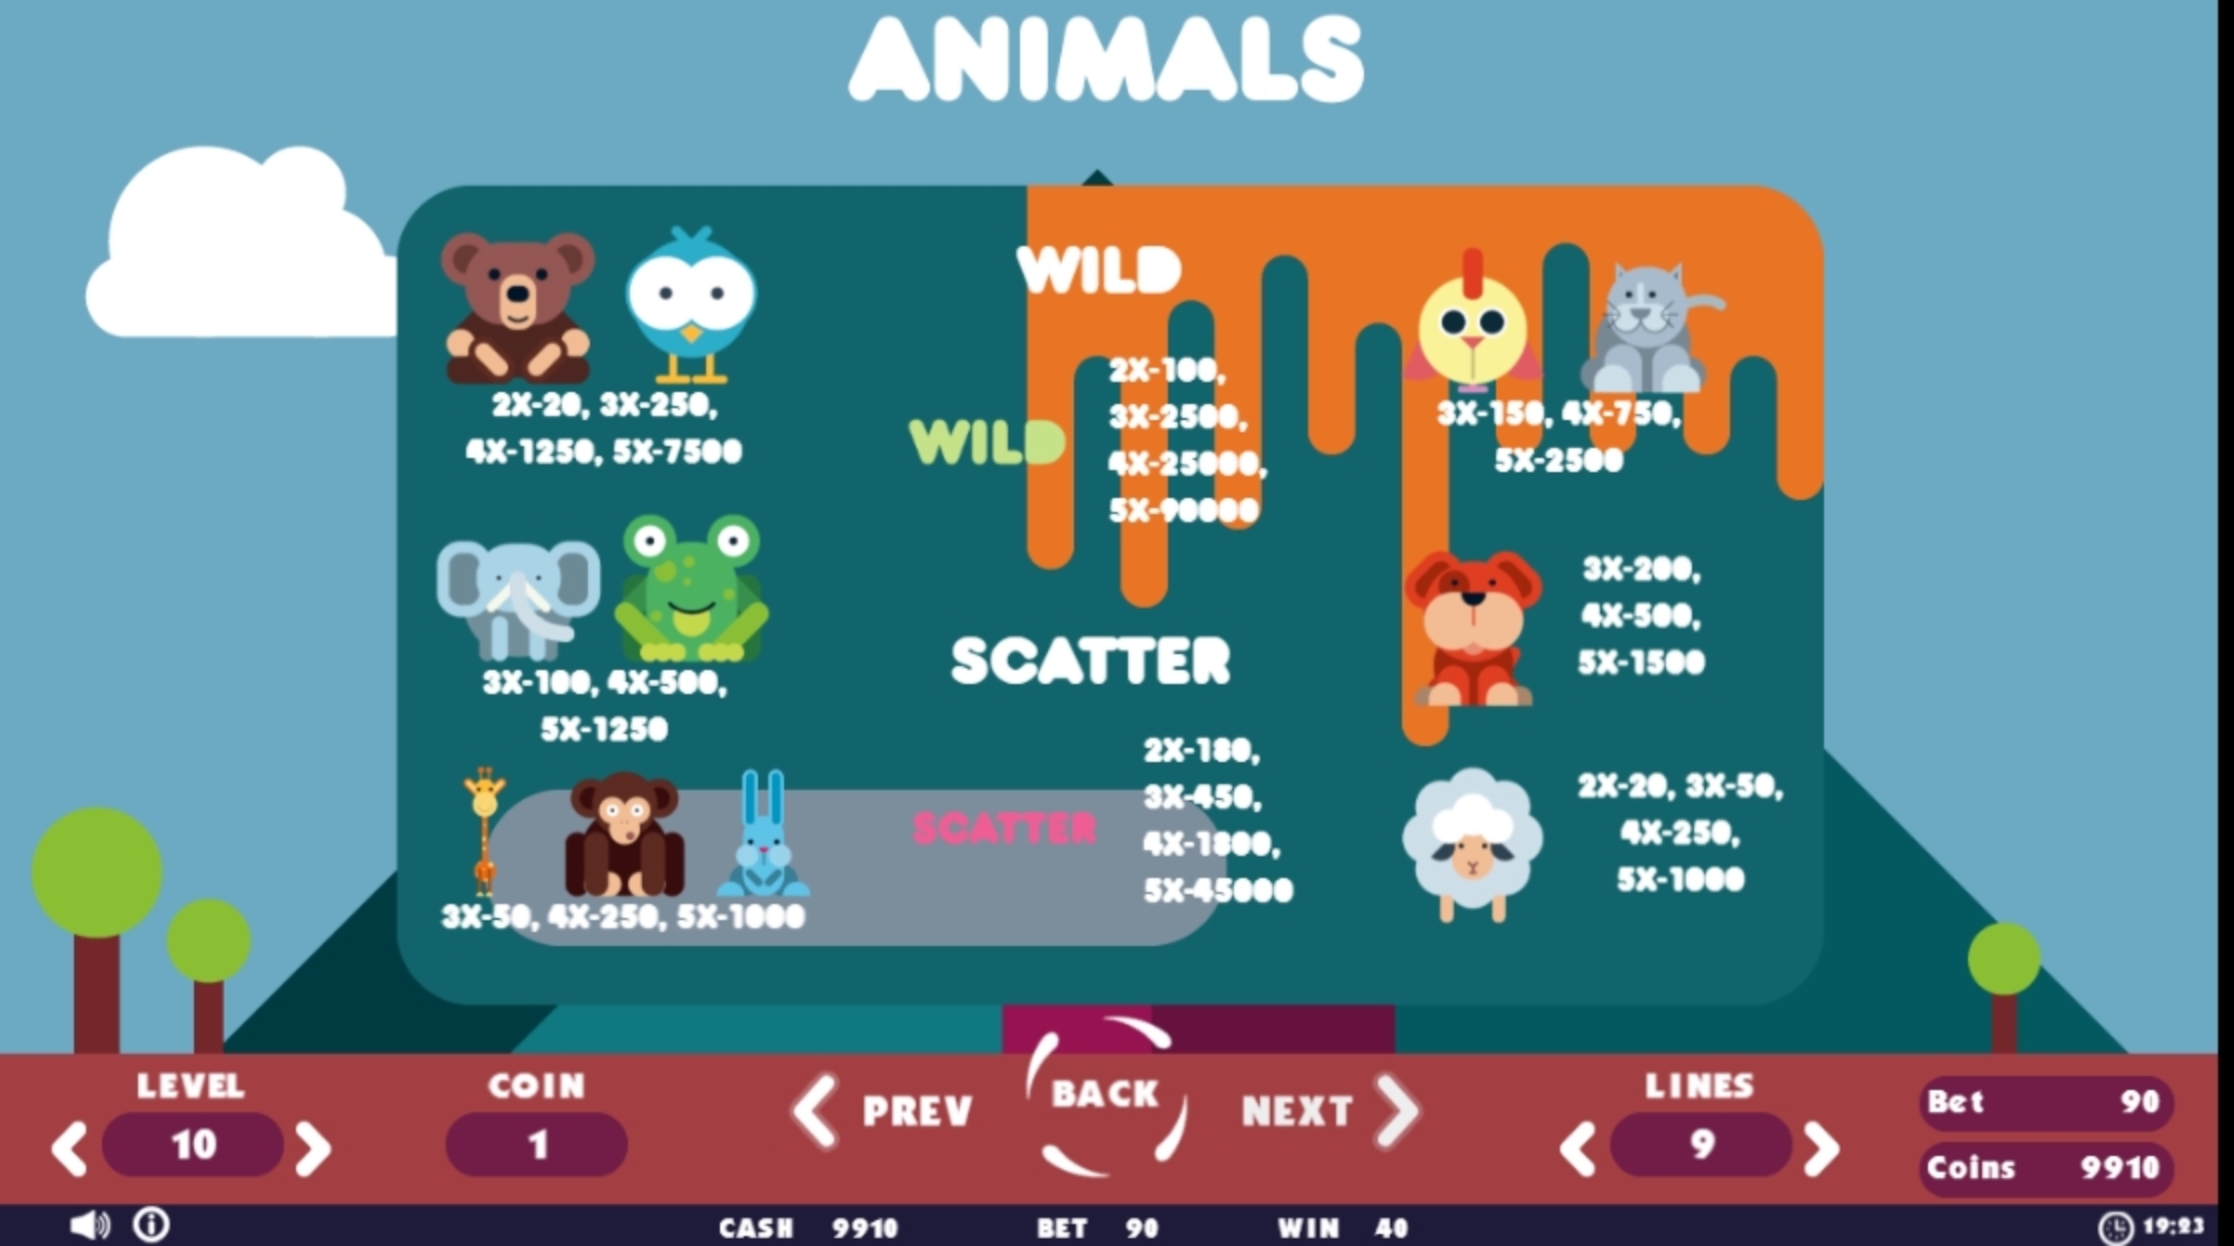 Info of Animals Slot Game by Betconstruct